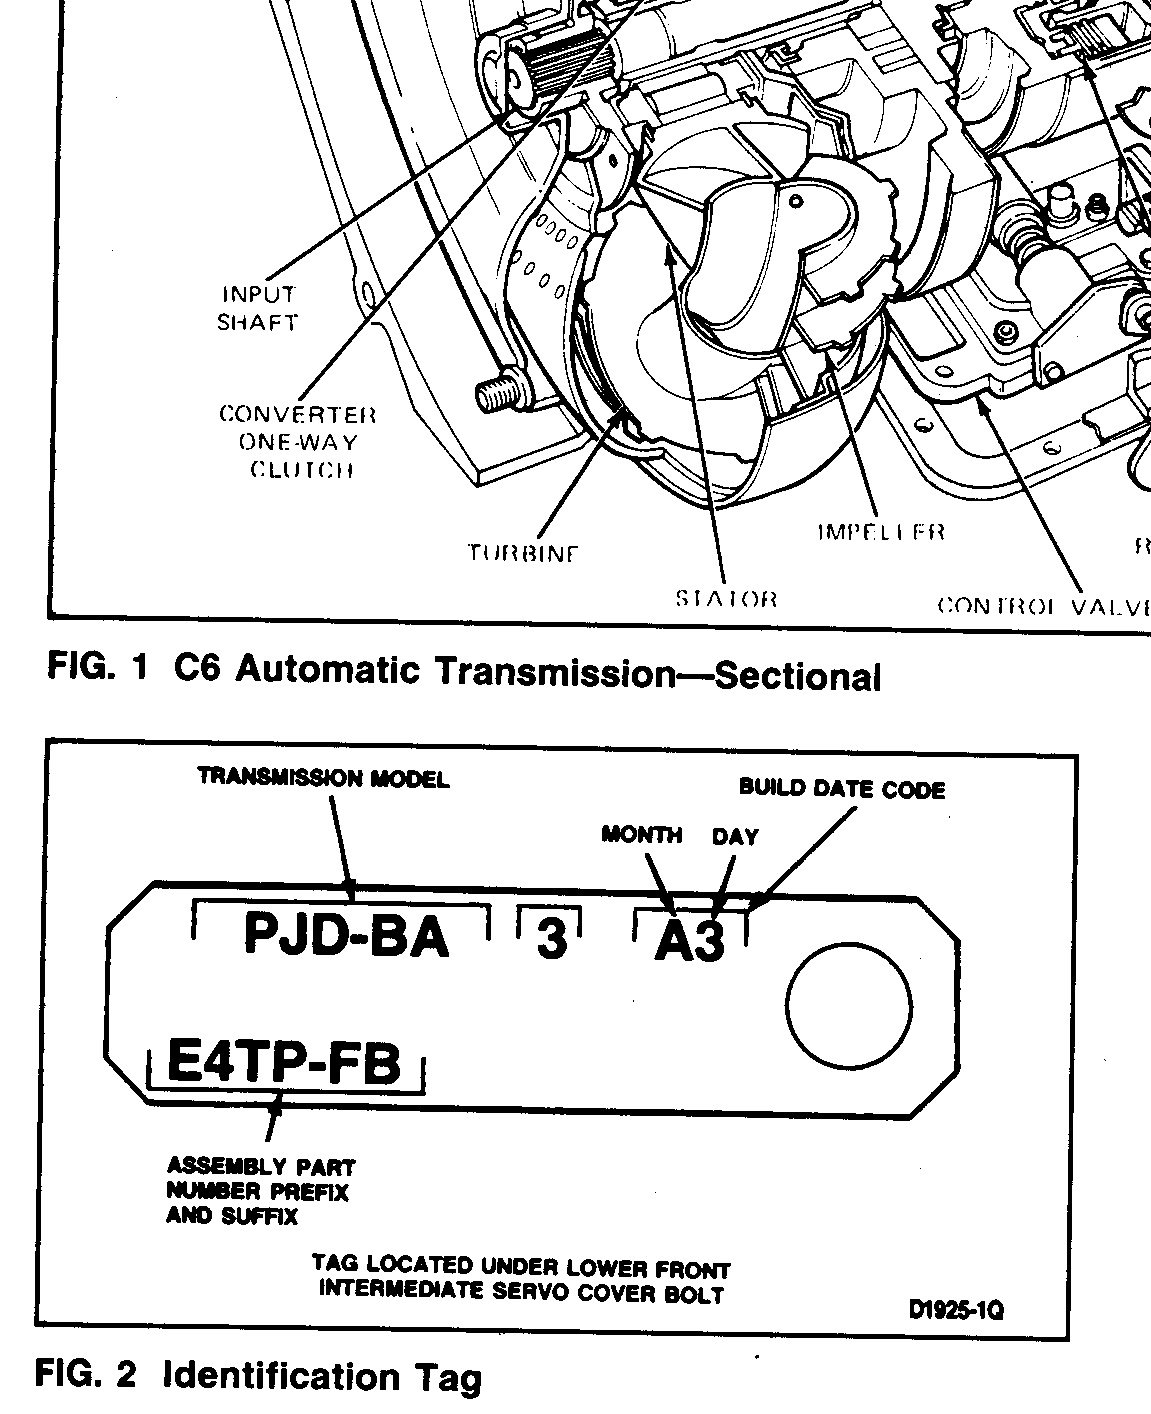 Deciphering ford transmission tags #3